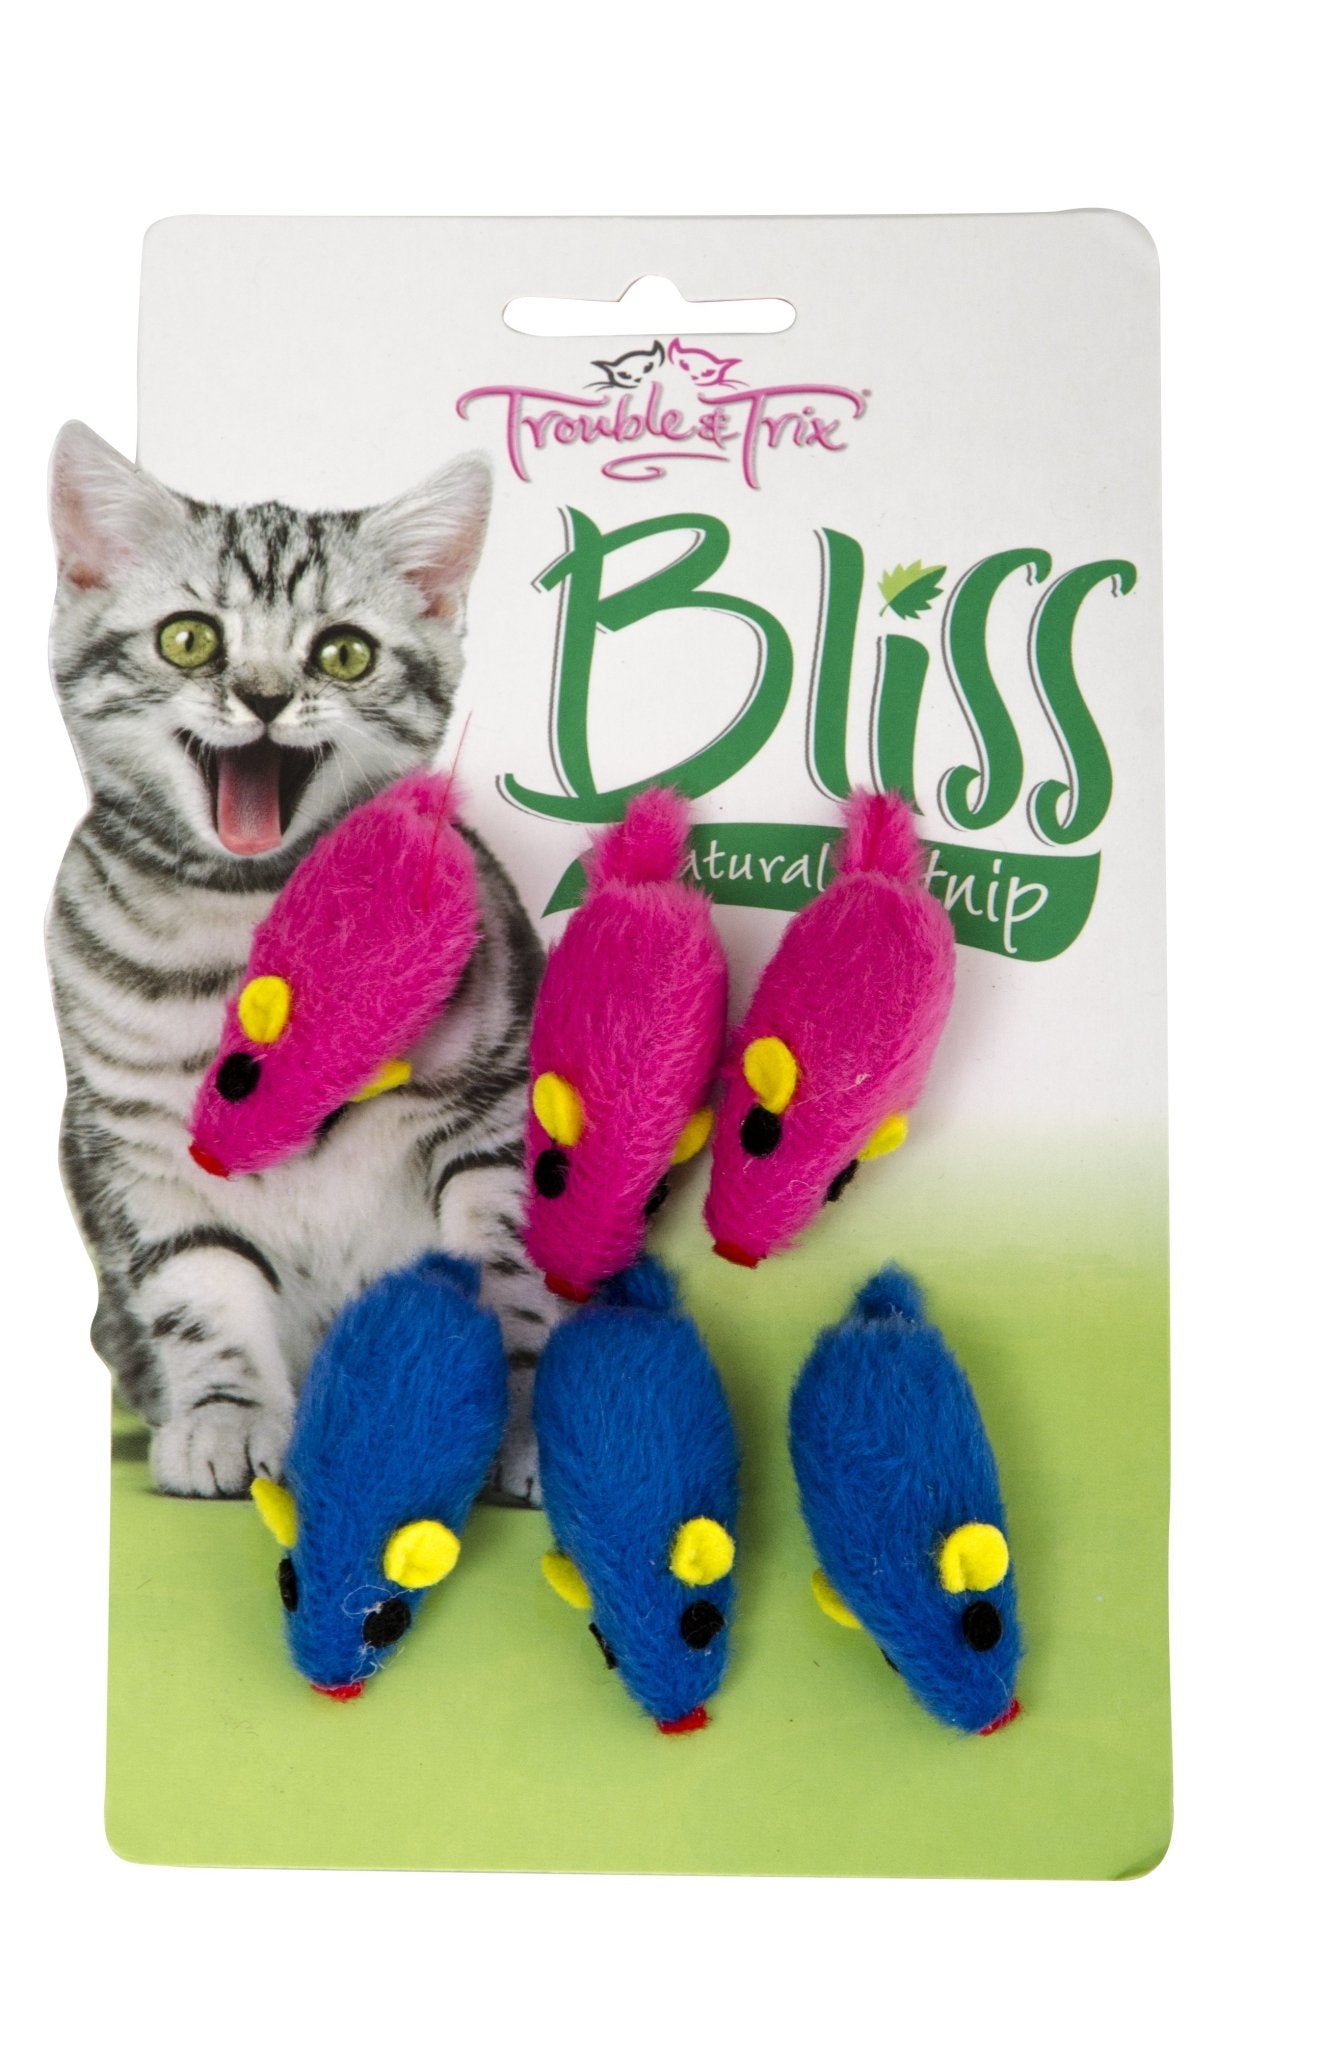 Trouble & Trix Cat Toy Bliss Mice 6 Pack - Woonona Petfood & Produce